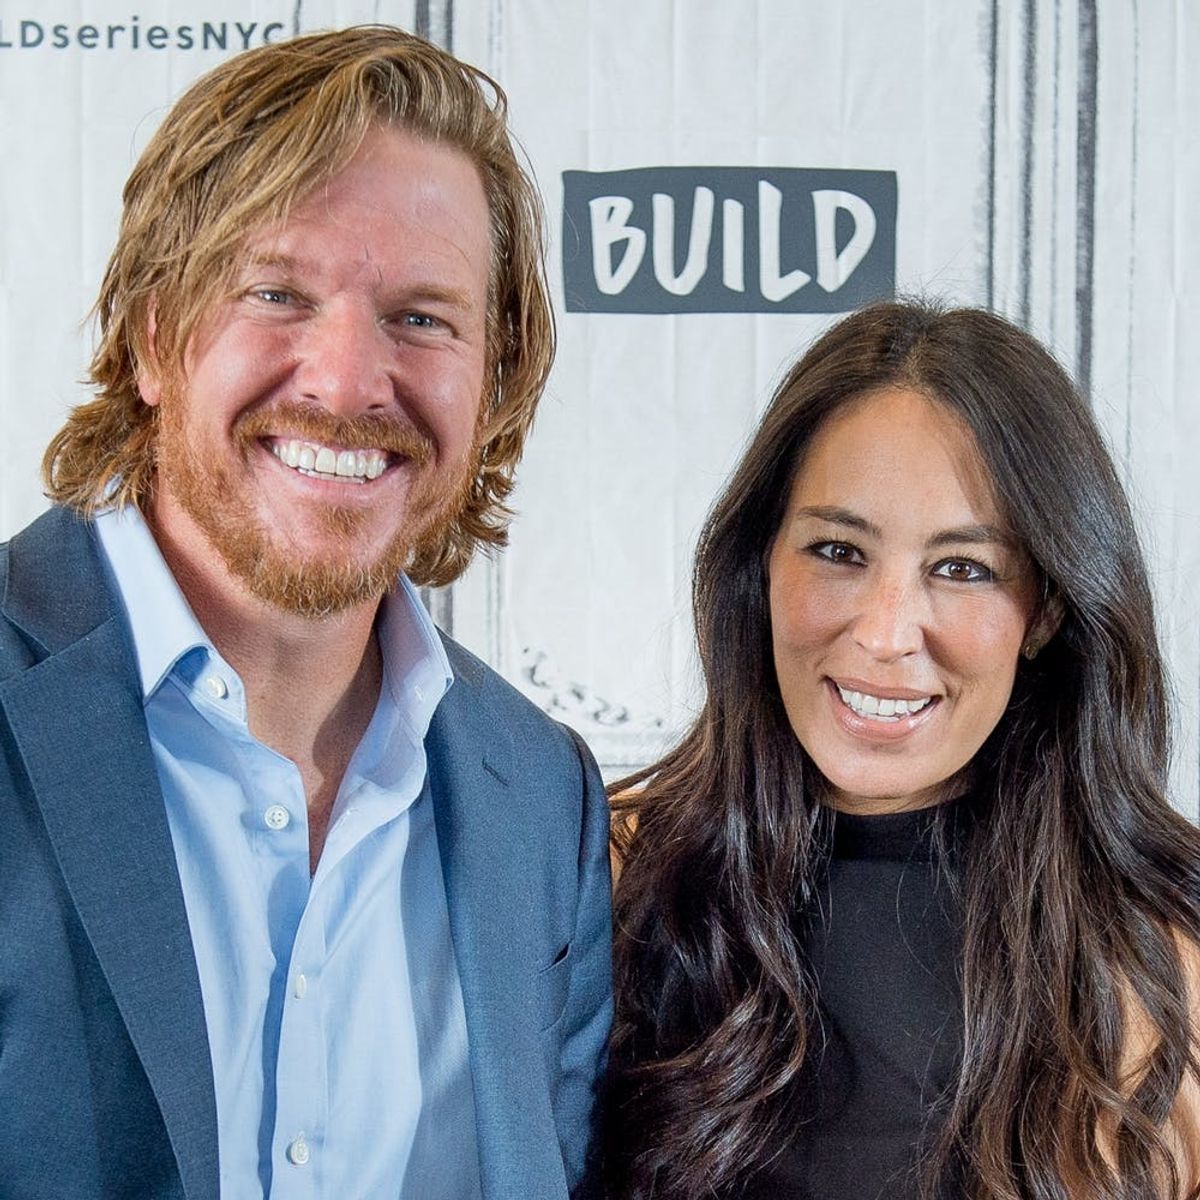 Chip and Joanna Gaines Could Be Coming Back to TV Sooner Than We Thought